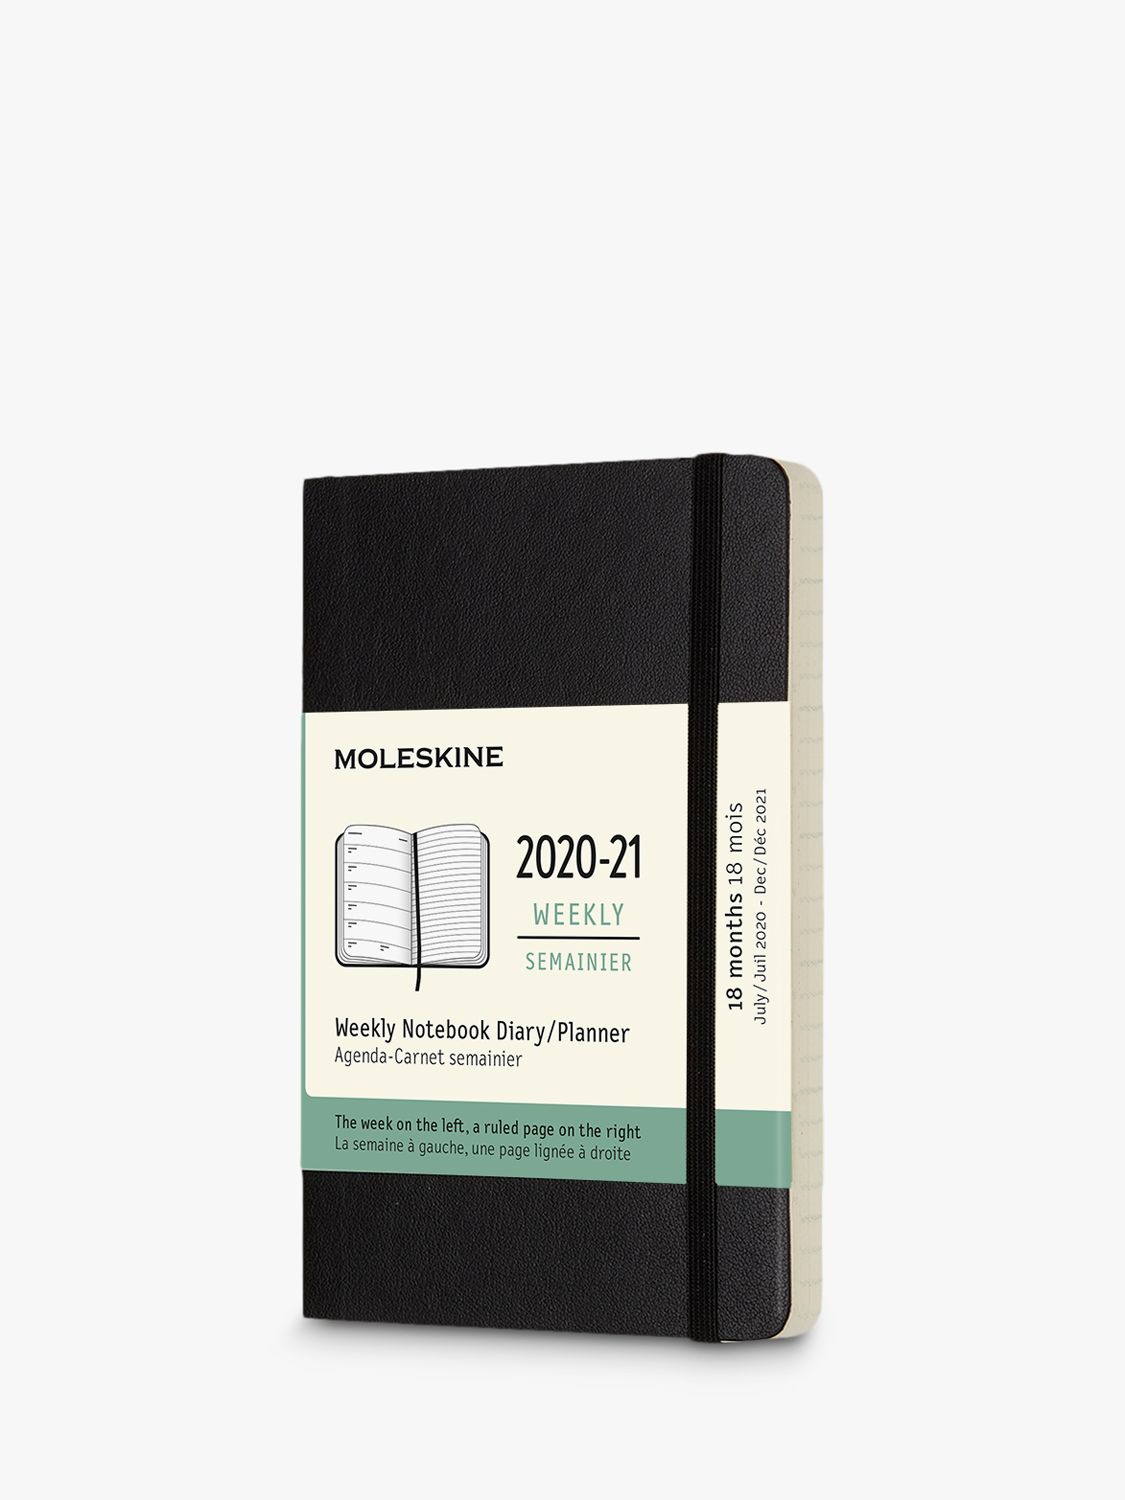 Moleskine Pocket Softcover Weekly Mid Year Academic Notebook Diary 2020-21